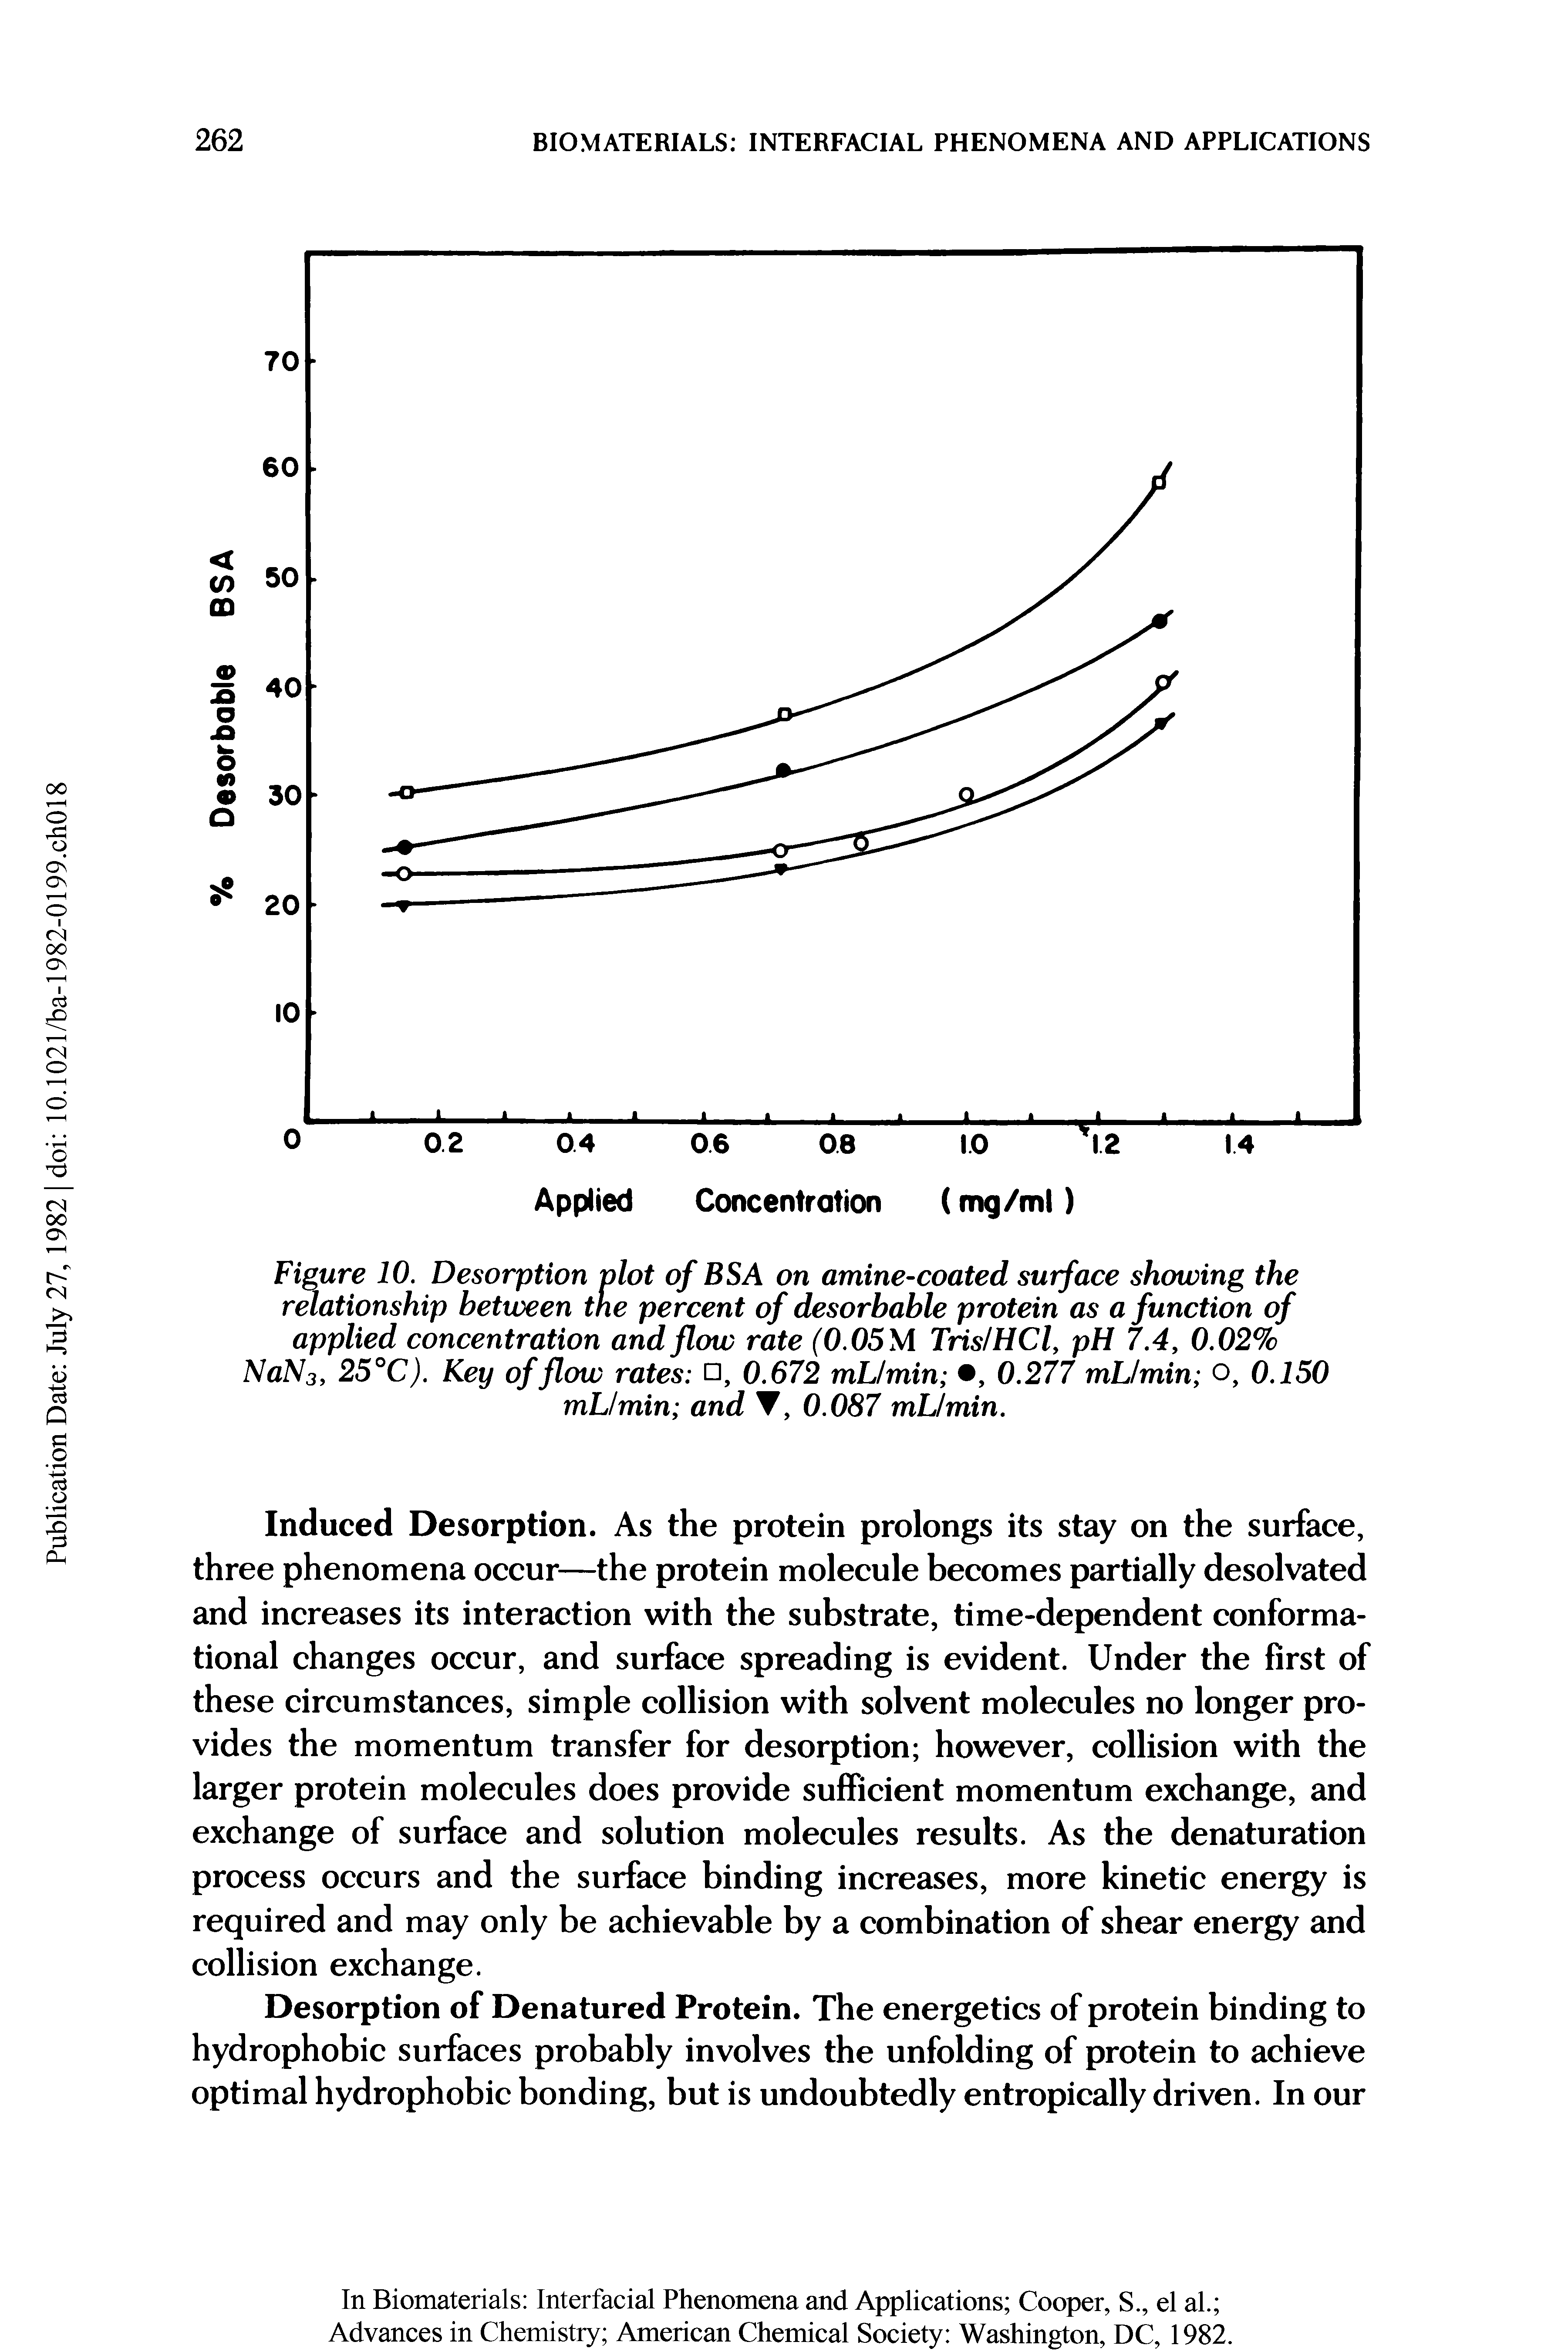 Figure 10. Desorption plot of BSA on amine-coated surface showing the relationship between the percent of desorbable protein as a function of applied concentration and flow rate (0.05 M Tris/HCl, pH 7.4, 0.02% NaN3, 25°C). Key of flow rates , 0.672 mLlmin , 0.277 mLlmin o, 0.150 mL/min and , 0.087 mLlmin.